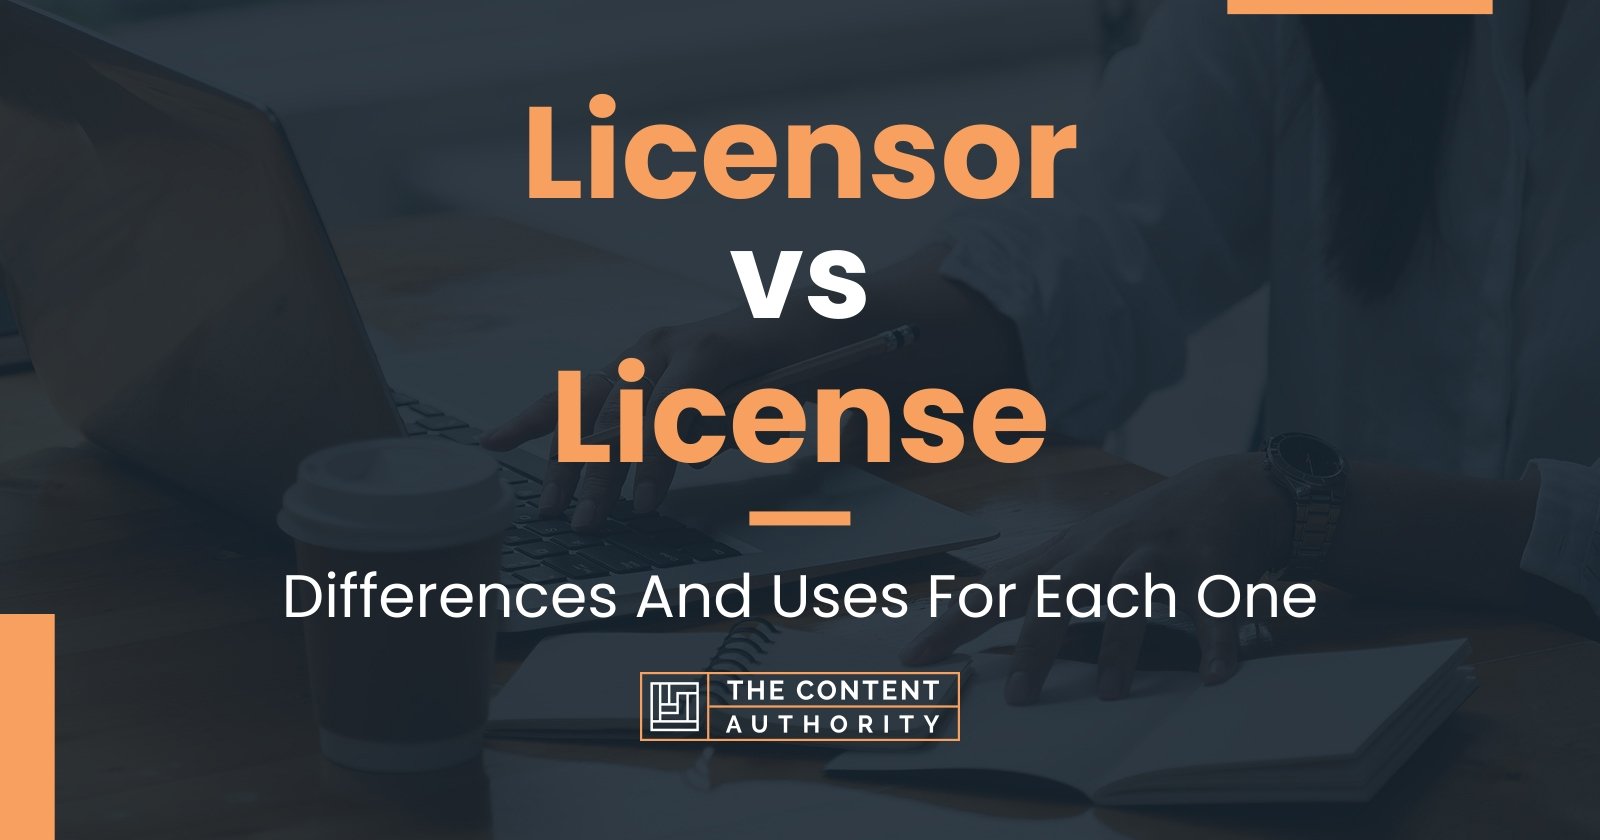 Licensor vs License: Differences And Uses For Each One